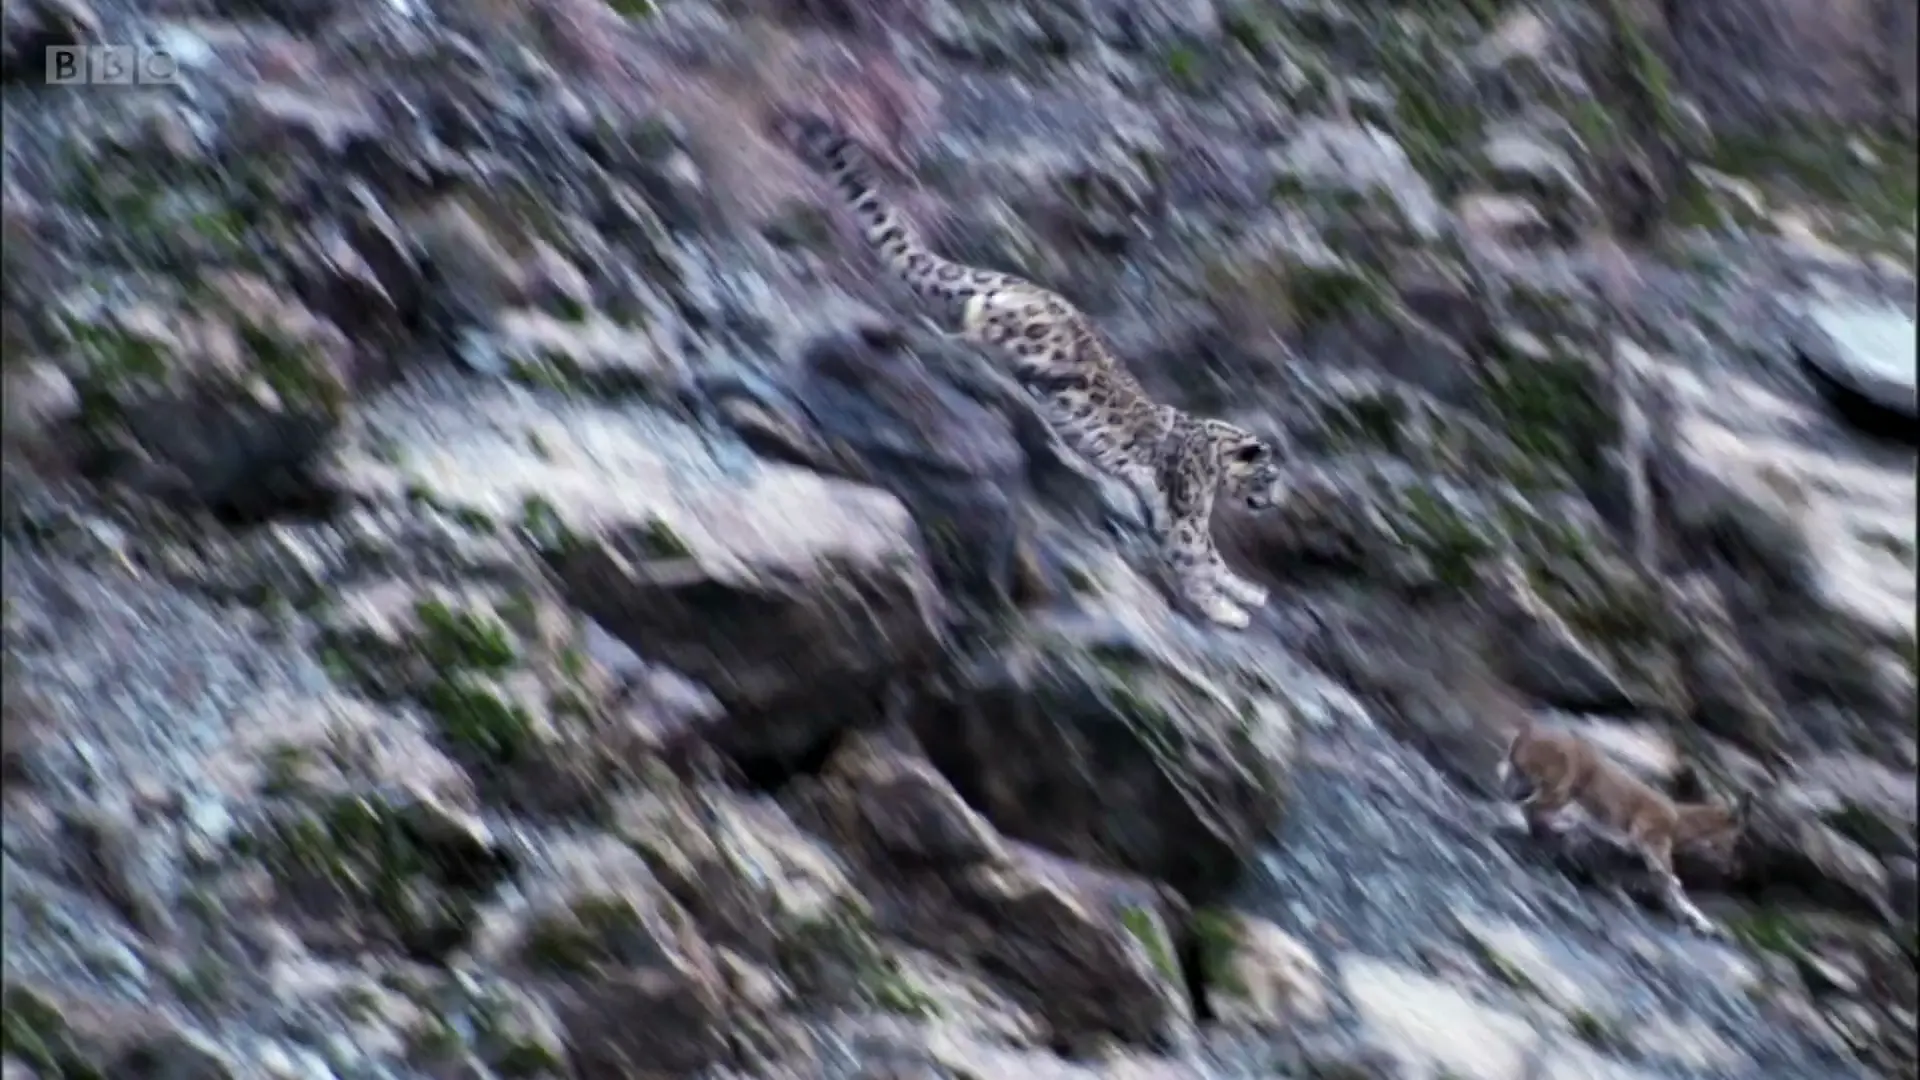 Snow leopard (Panthera uncia) as shown in Planet Earth - Mountains